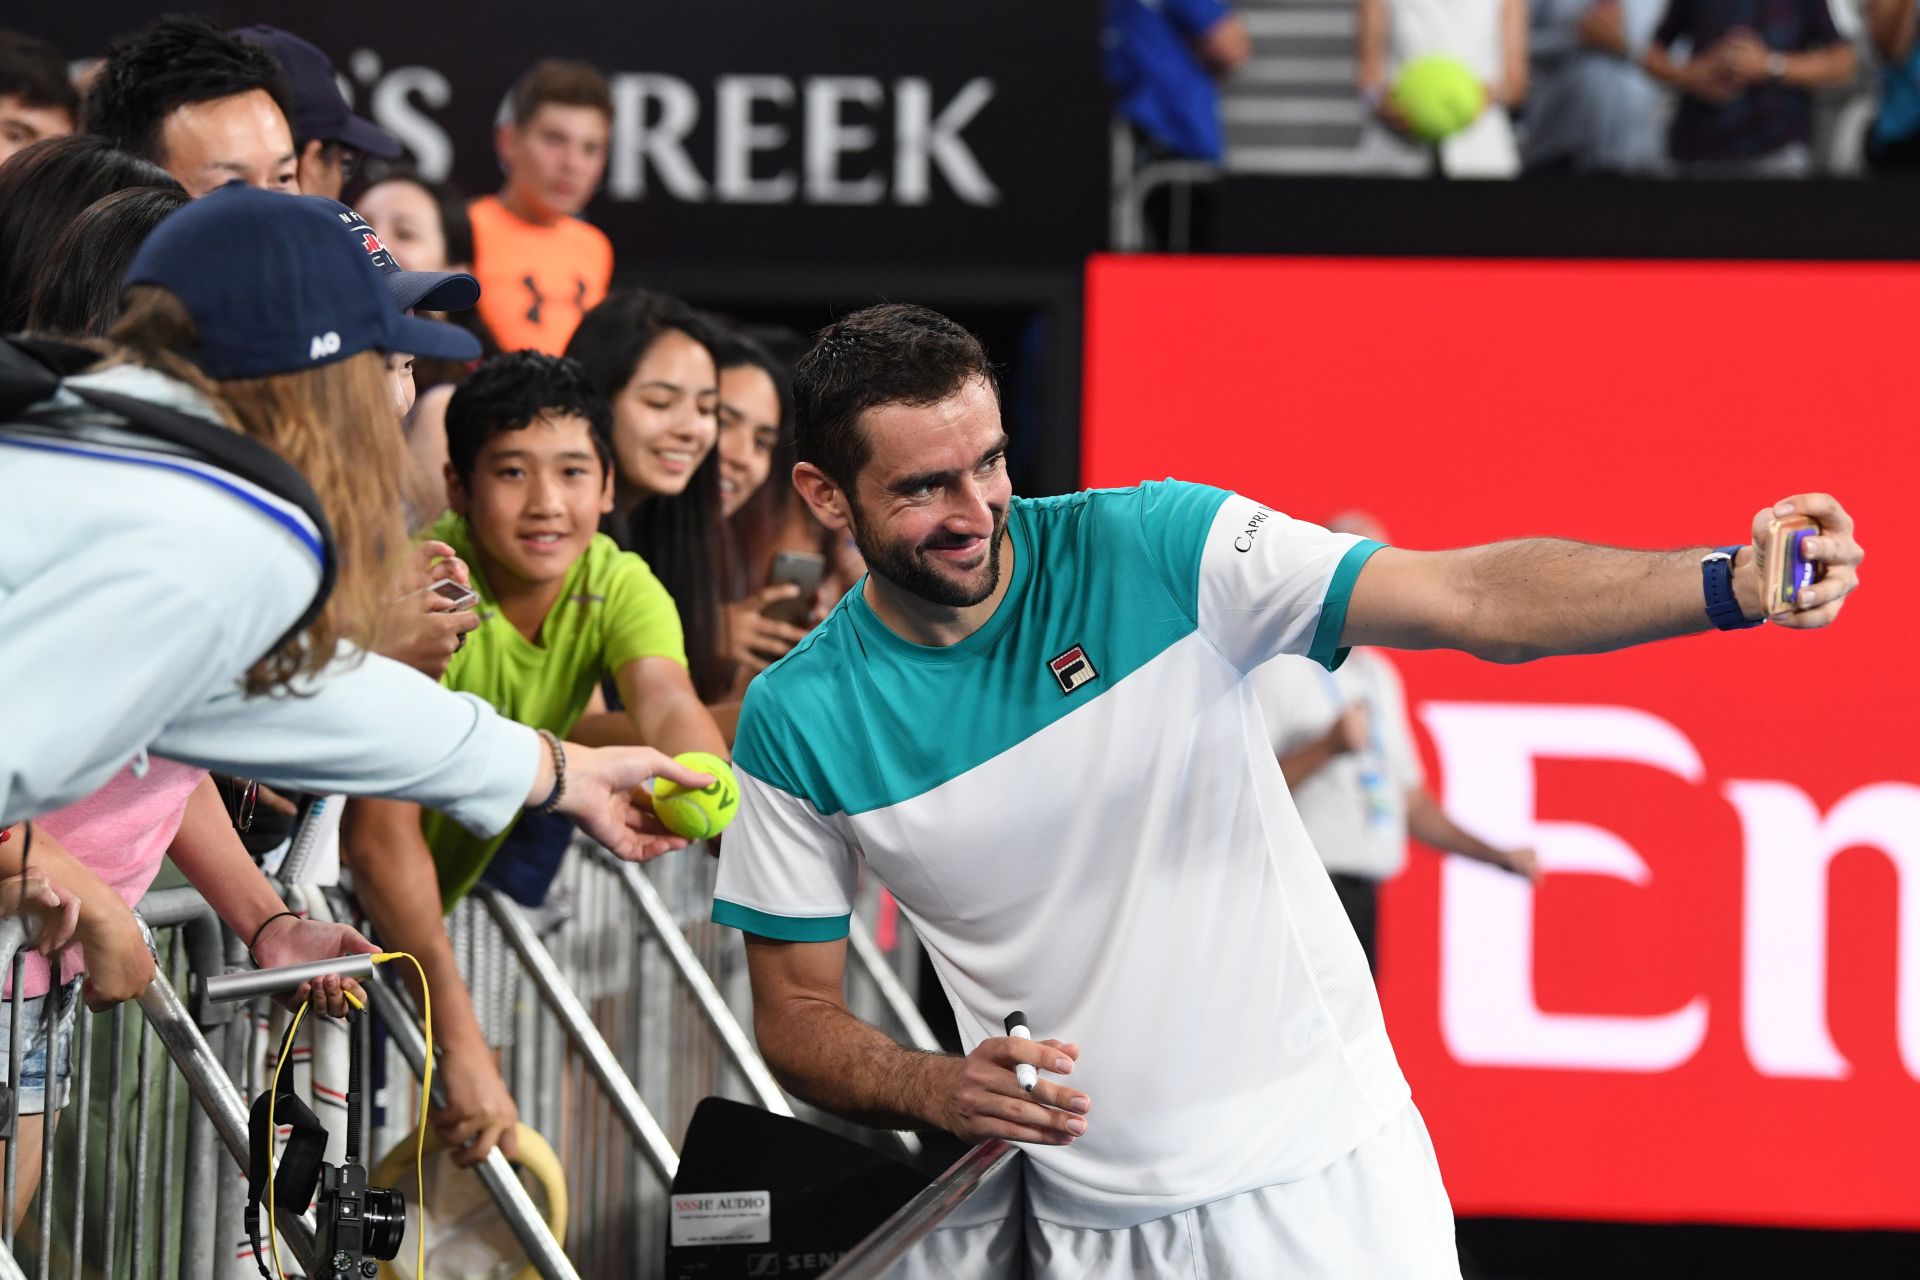 epa06453523 Marin Cilic of Croatia signs autographs after his win against Ryan Harrison of the United States at the Australian Open tennis tournament in Melbourne, Victoria, Australia, 19 January 2018.  EPA/JOE CASTRO  AUSTRALIA AND NEW ZEALAND OUT